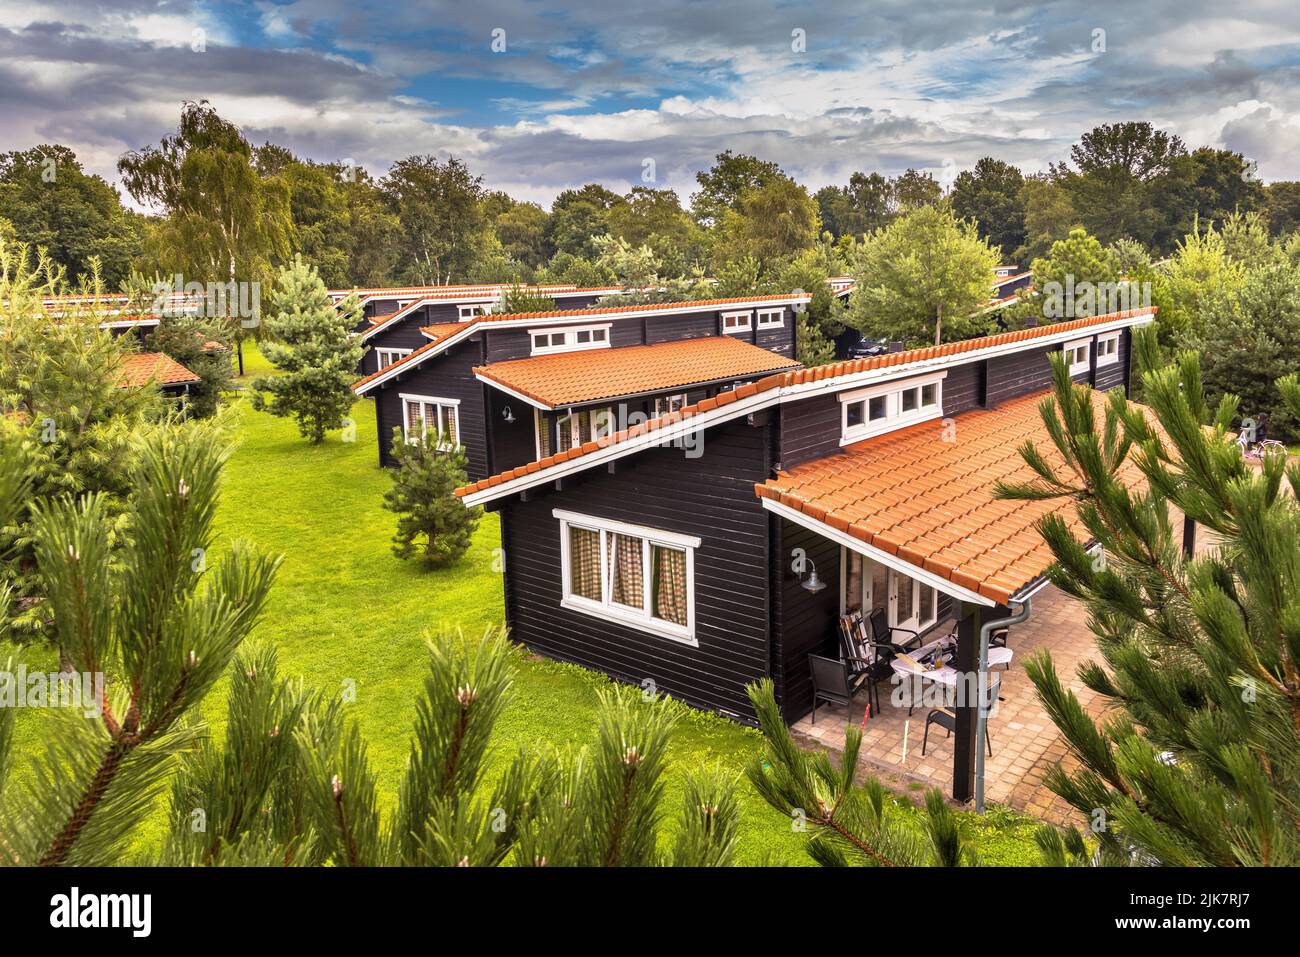 Holiday Bungalow park with identical cottages in symetrical order in green forested area. Wooden chalets with orange roof tiles in grass and bushes. N Stock Photo